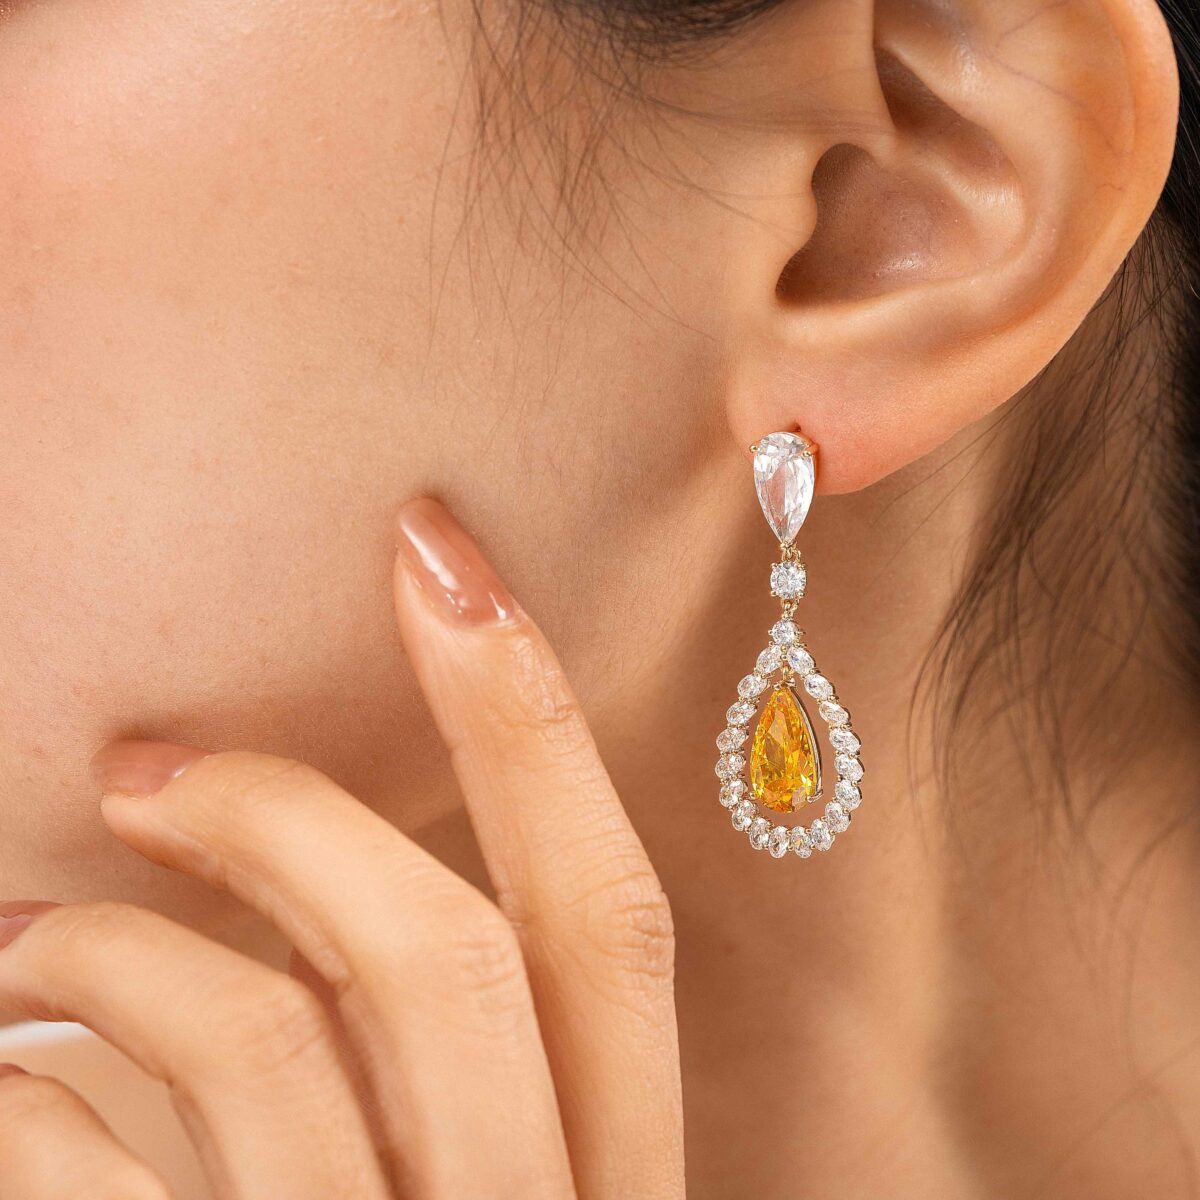 https://m.clubbella.co/product/magma-14k-gold-plated-crystal-earrings/ MAGMA CRYSTAL EARRINGS (2)